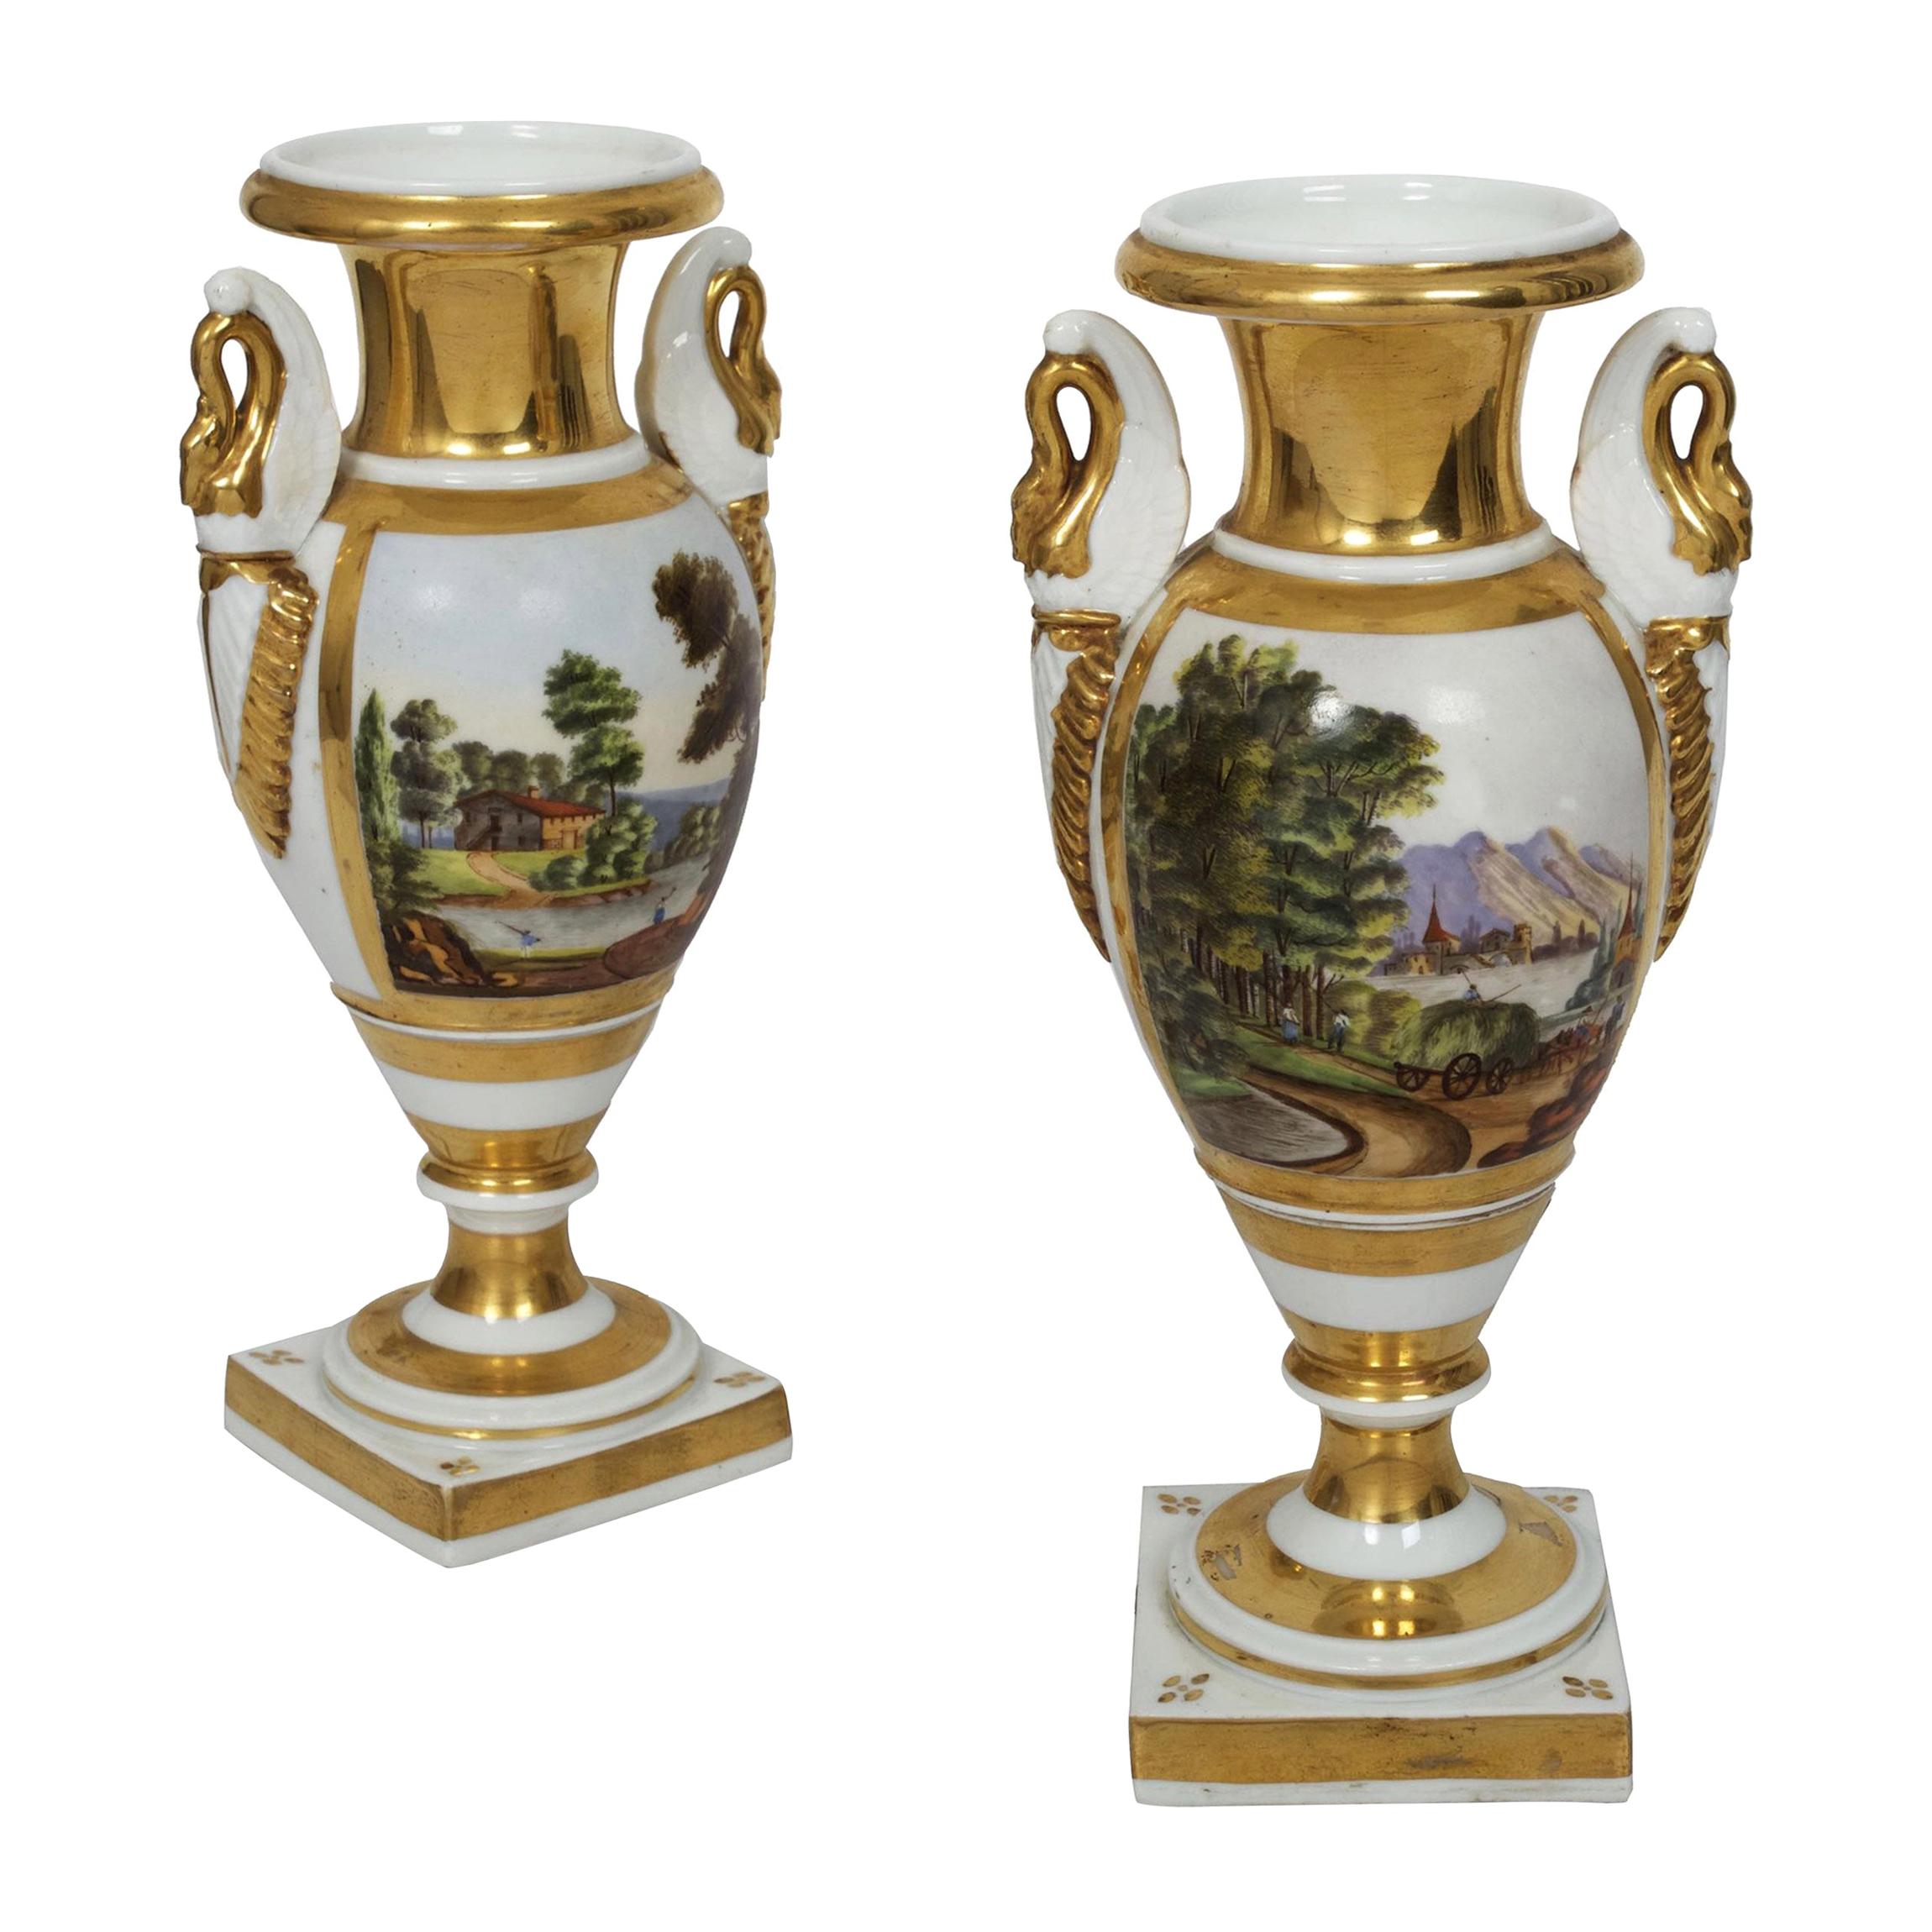 Pair of French Parisian Painted Porcelain Swan-Form Vases, 19th Century